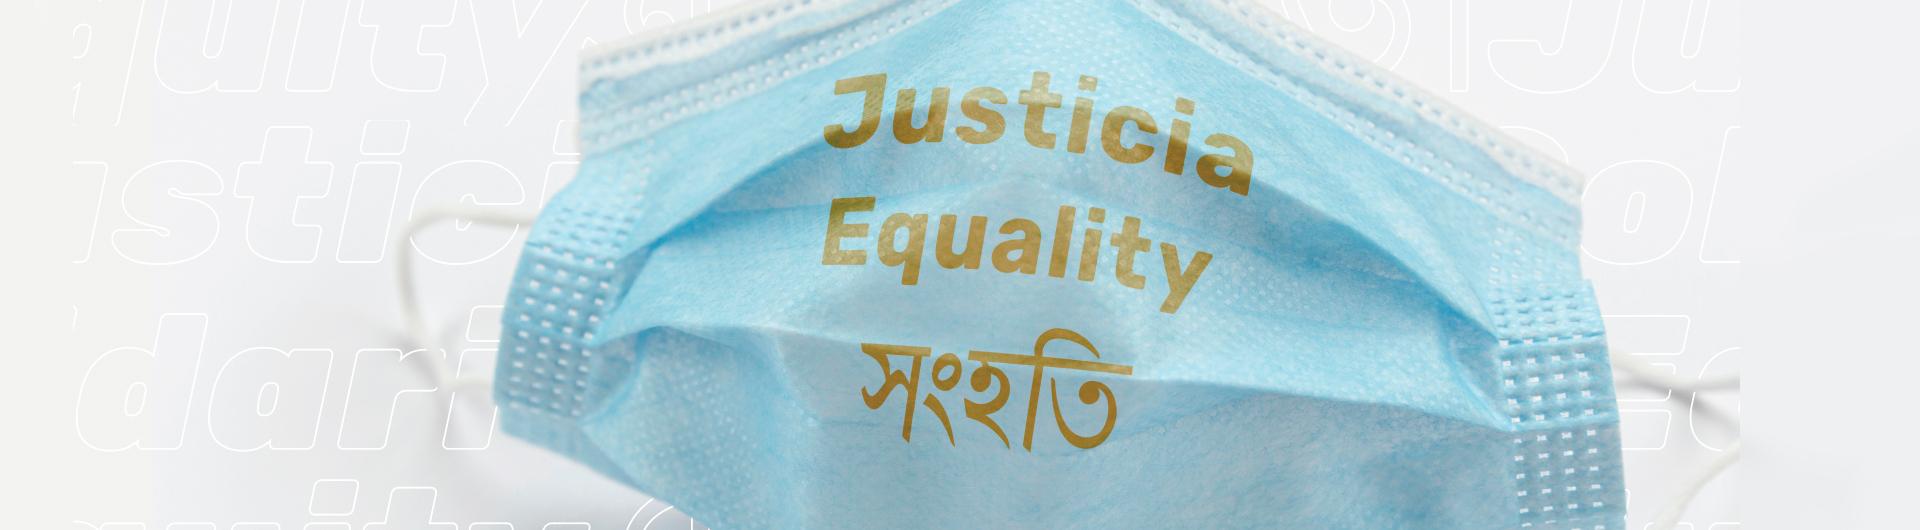 Surgical face mask with the words justicia and equality printed on the front